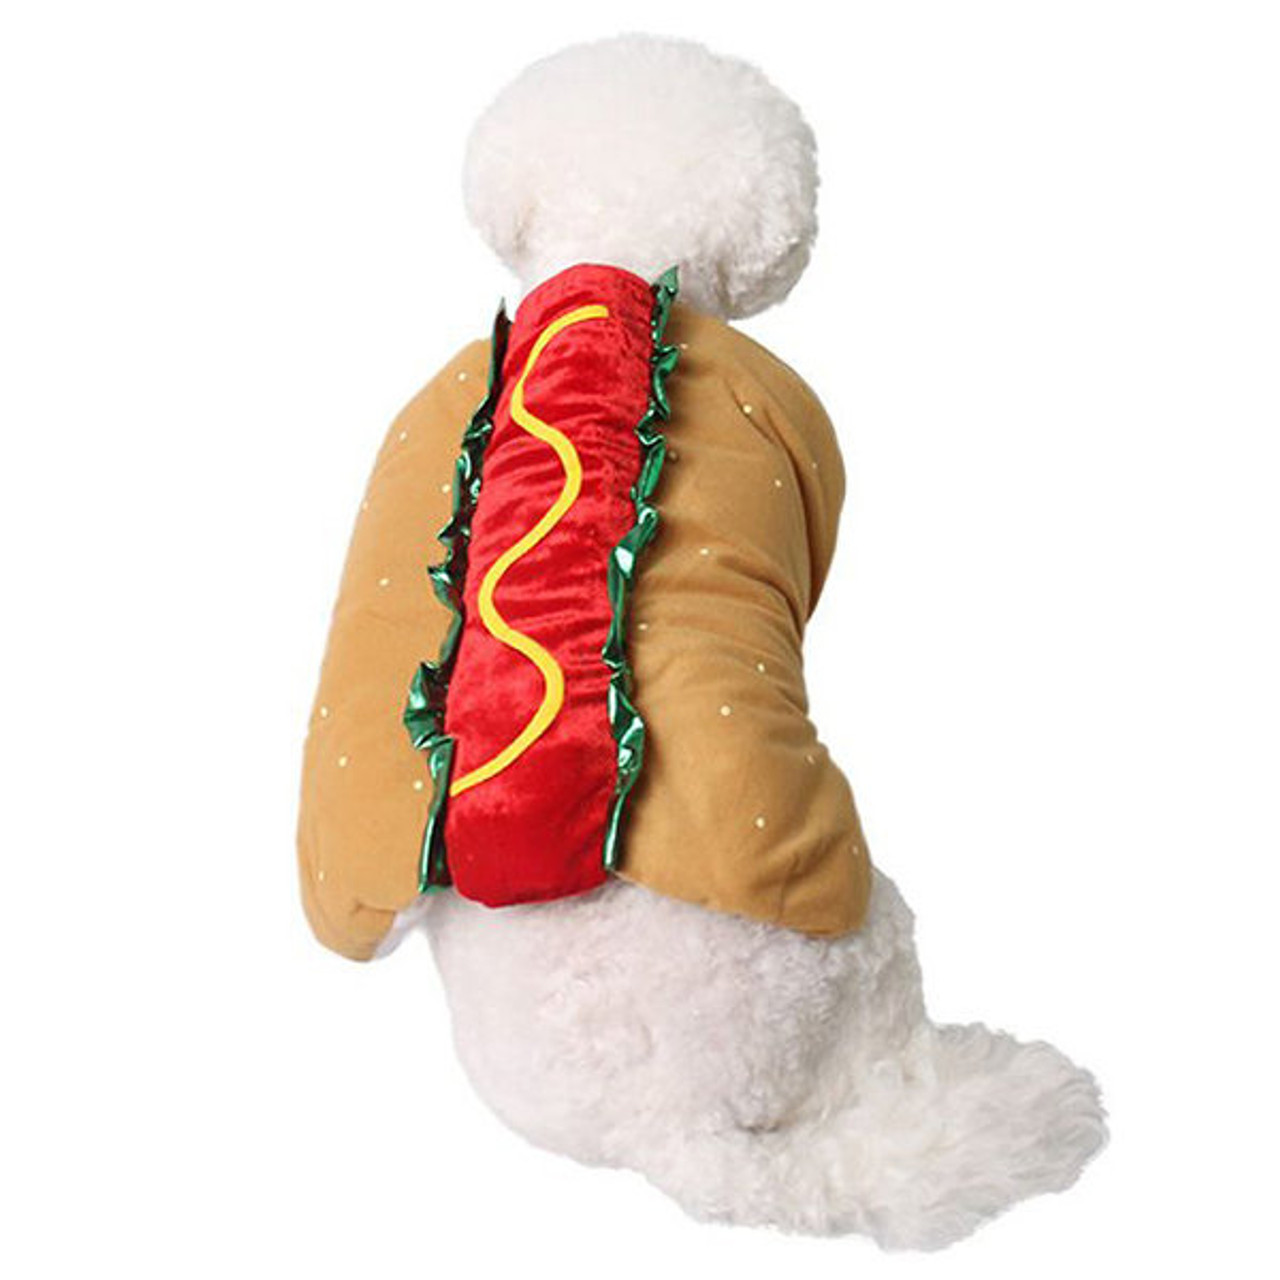 Adjustable Clothes Dachshund Puppy Sausage Pet Hot Dog Dress Up Costume